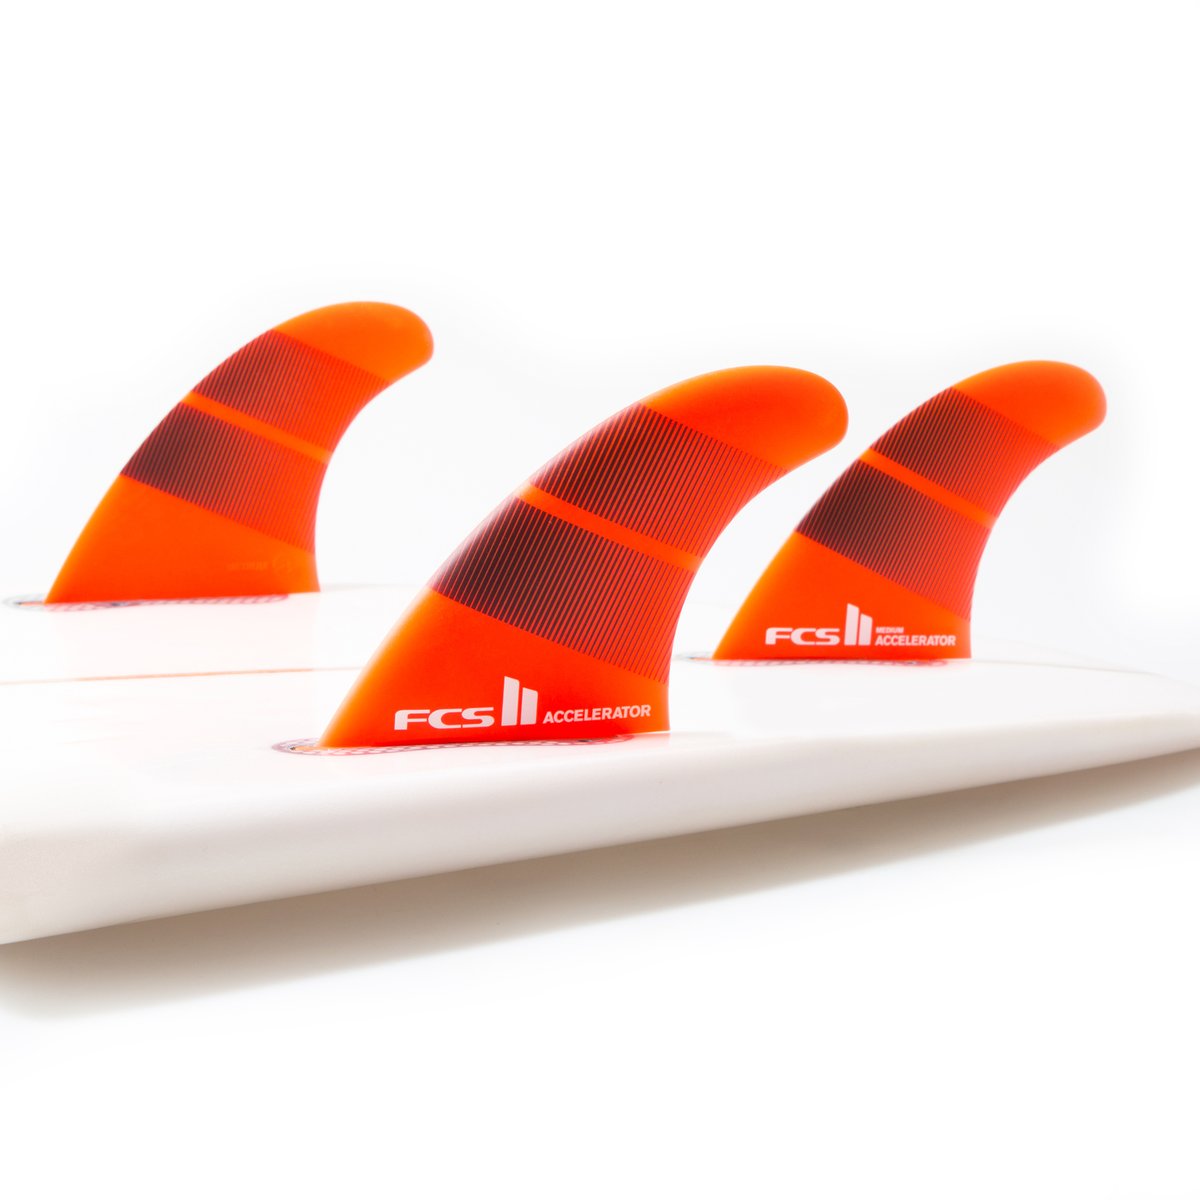 FCS II Accelerator Neo Glass Large Thruster Fins - Tang Gradient Fins